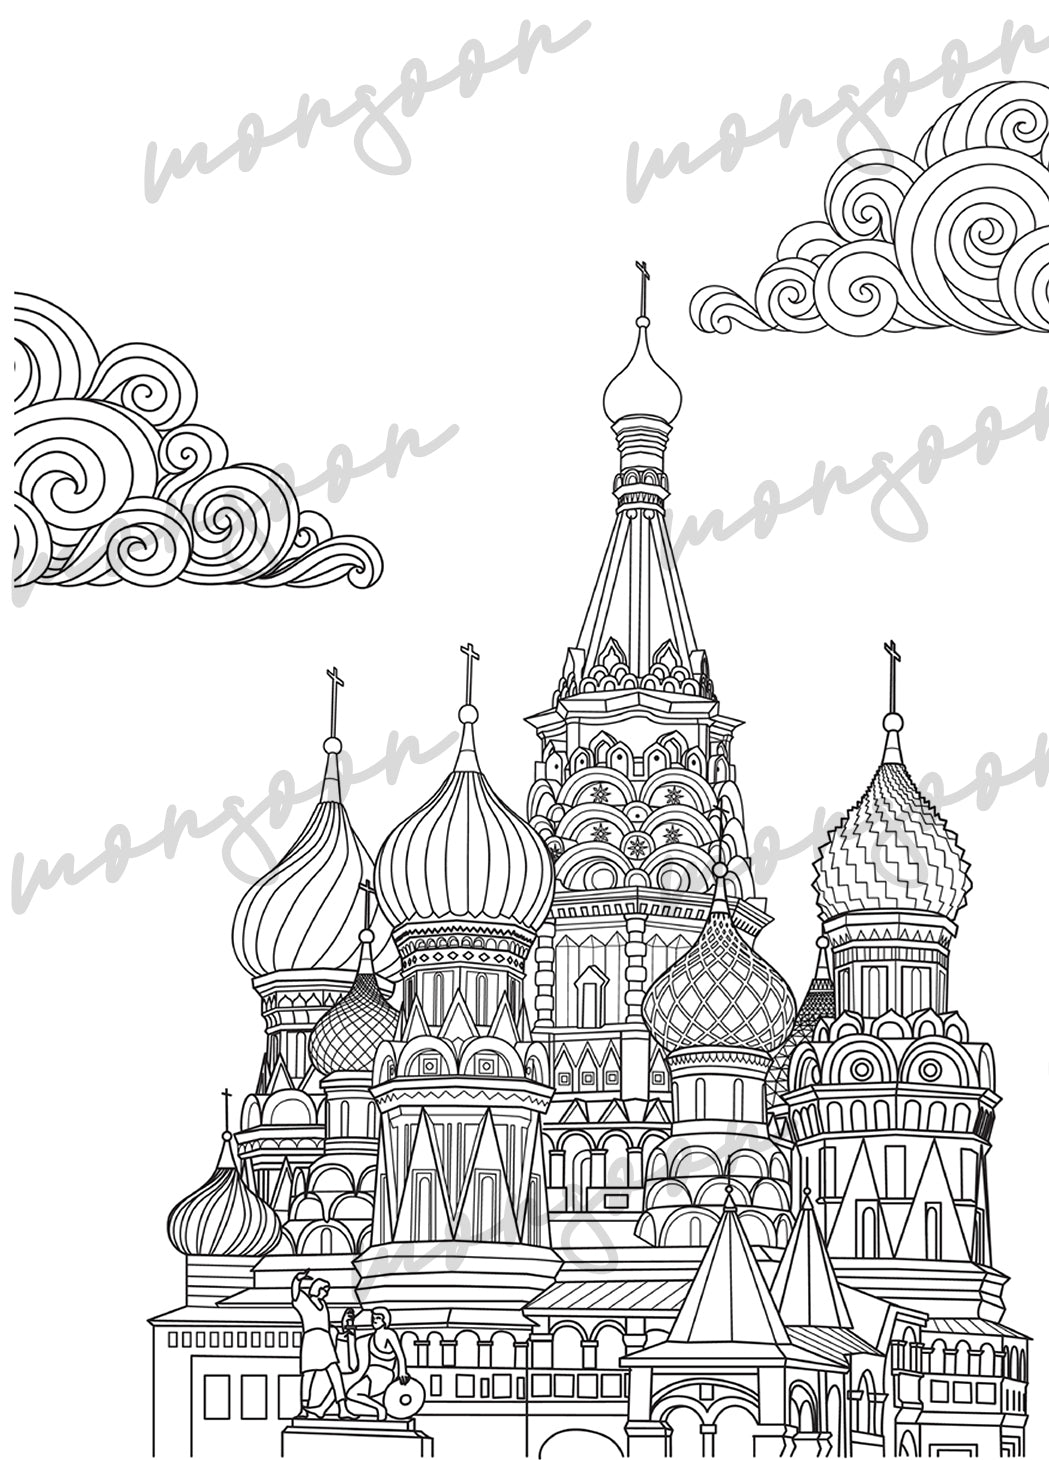 Cities Houses Castles Coloring Book (Printbook) - Monsoon Publishing USA